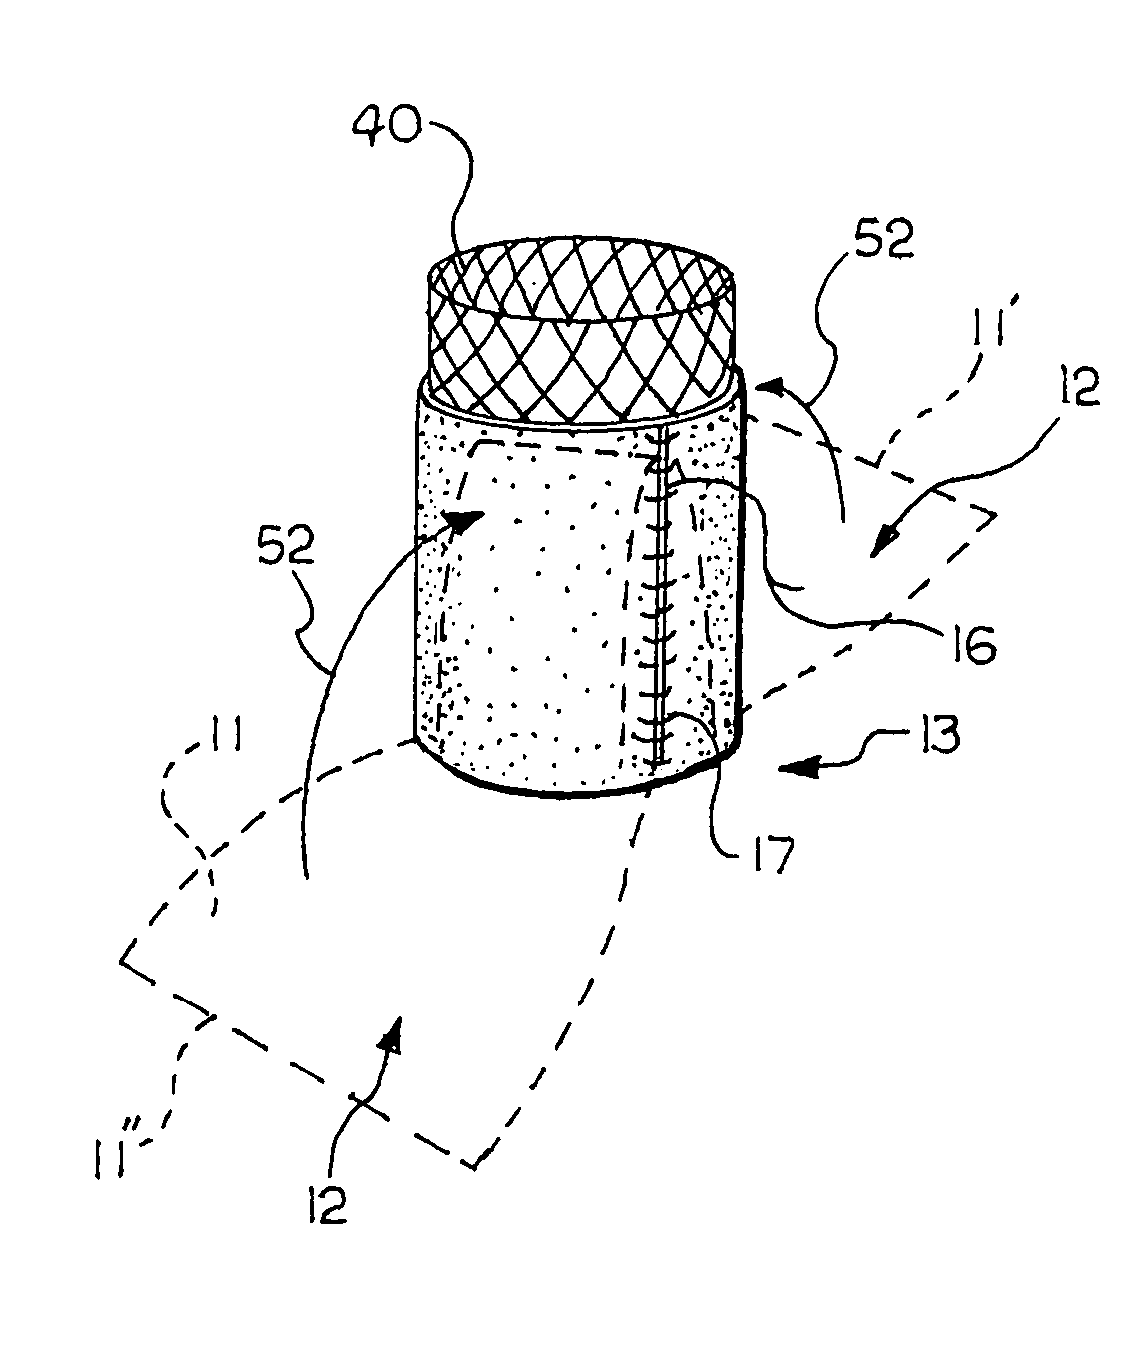 Prosthetic valve devices and methods of making such devices